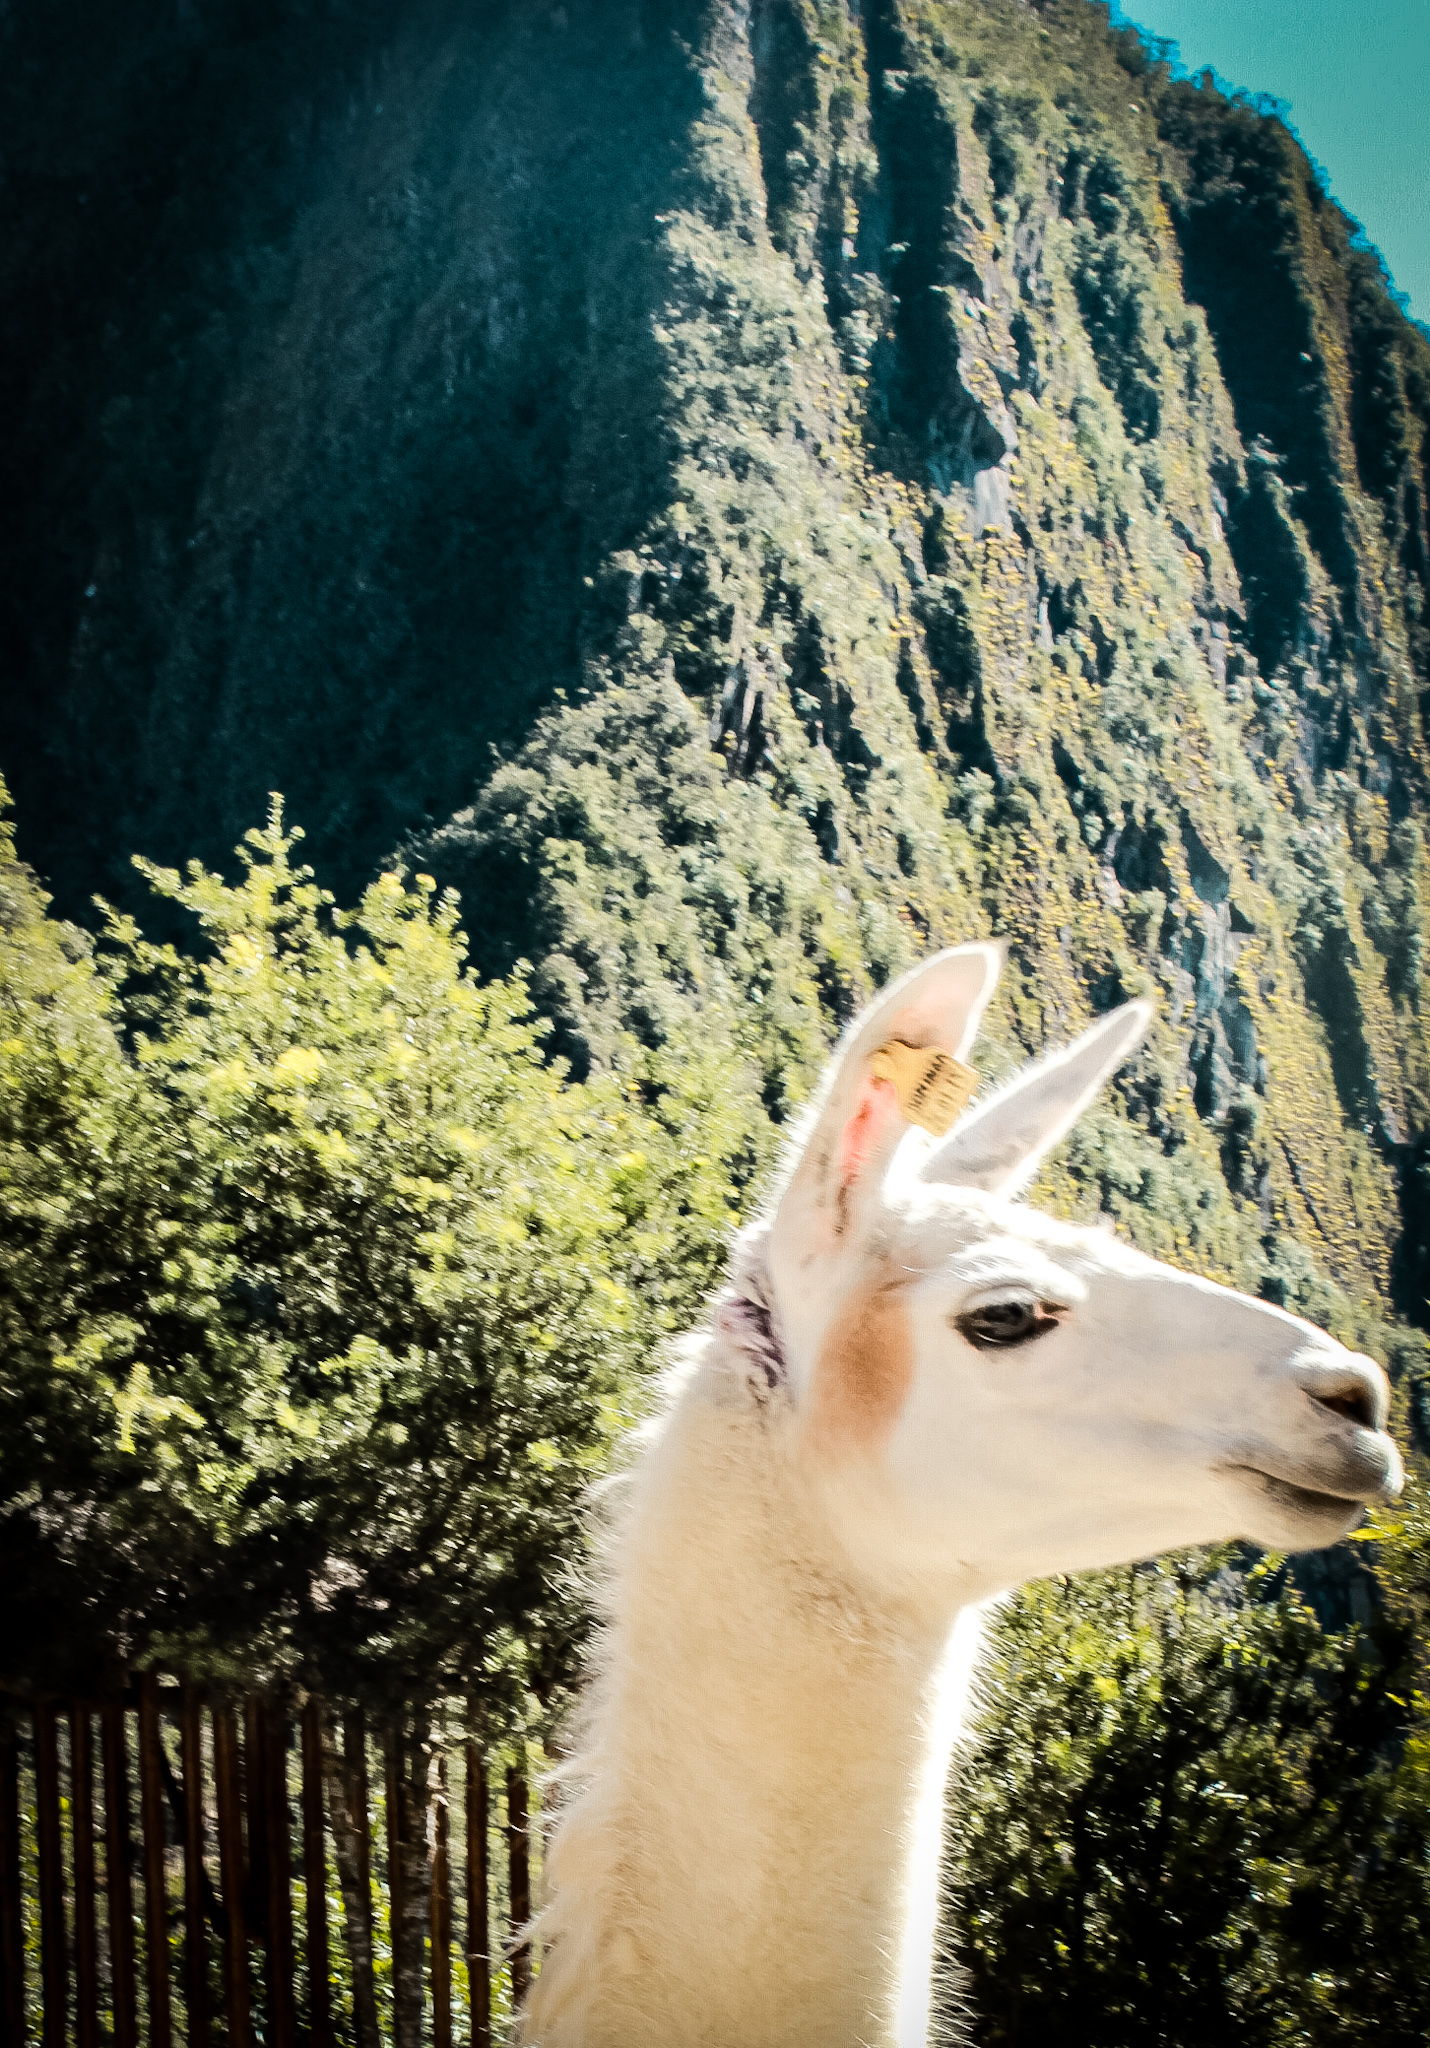 in this place you can see the Llamas, these animals are friendly and are part of the Peruvian culture, they are part of a mythical place where events happened that marked a history and perhaps after the colonization and the unjust death of the indigenous peoples, their souls habit this place.